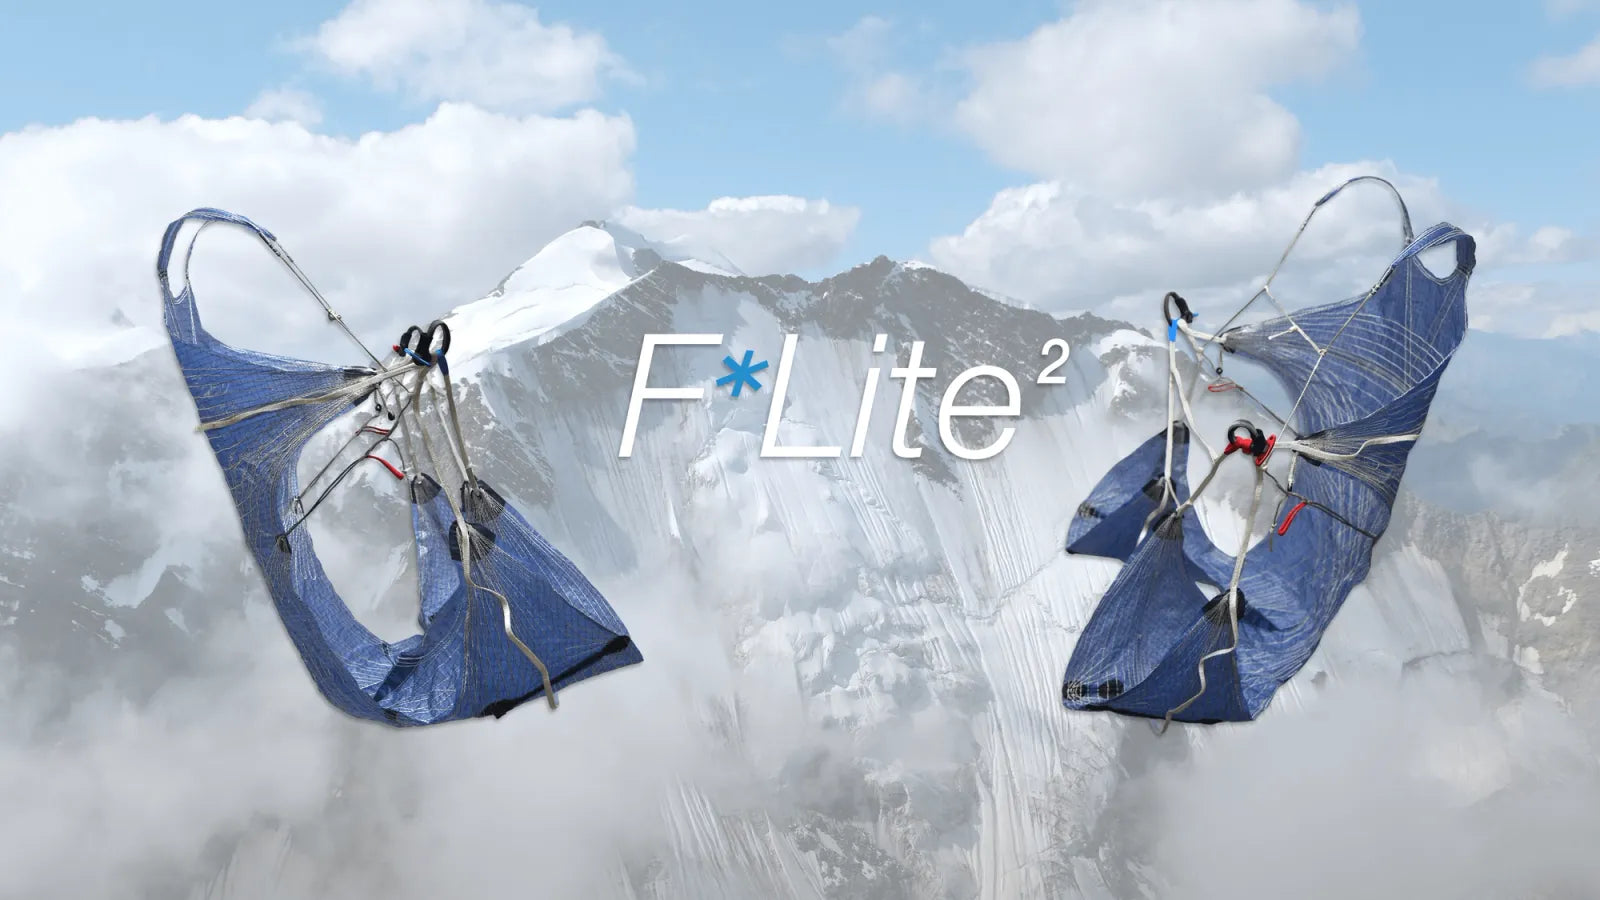 F*LITE 2: The World's Lightest Paragliding Harness